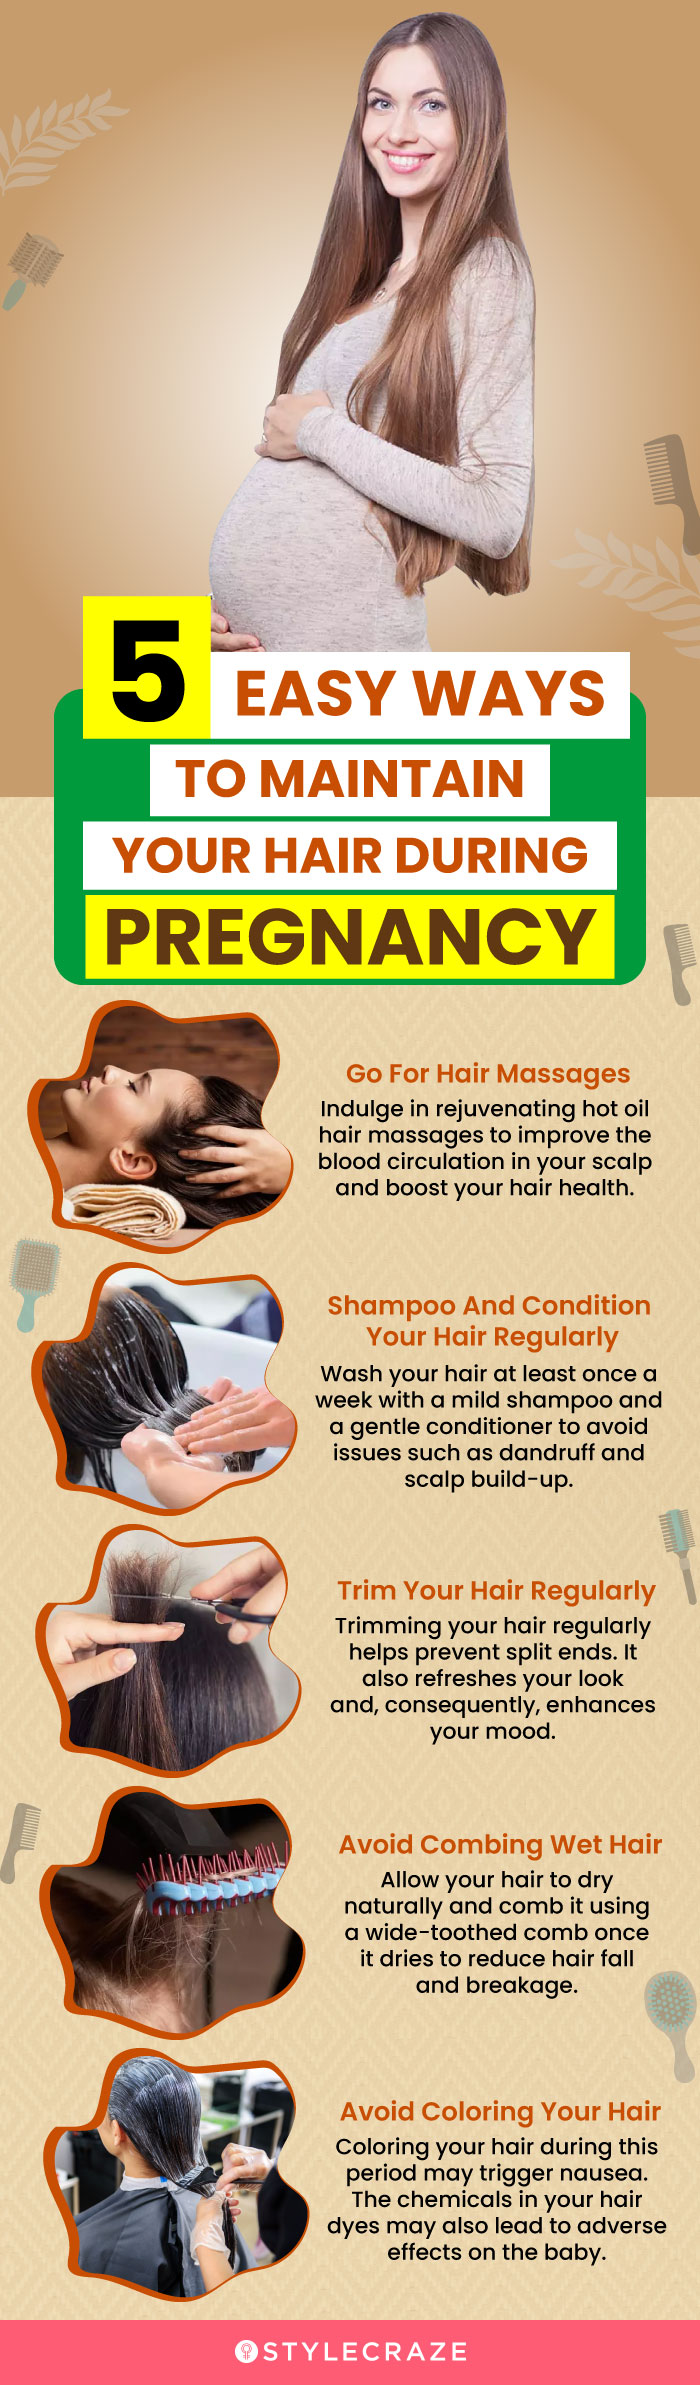 Pregnancy tips: 5 effective and natural ways for hair care